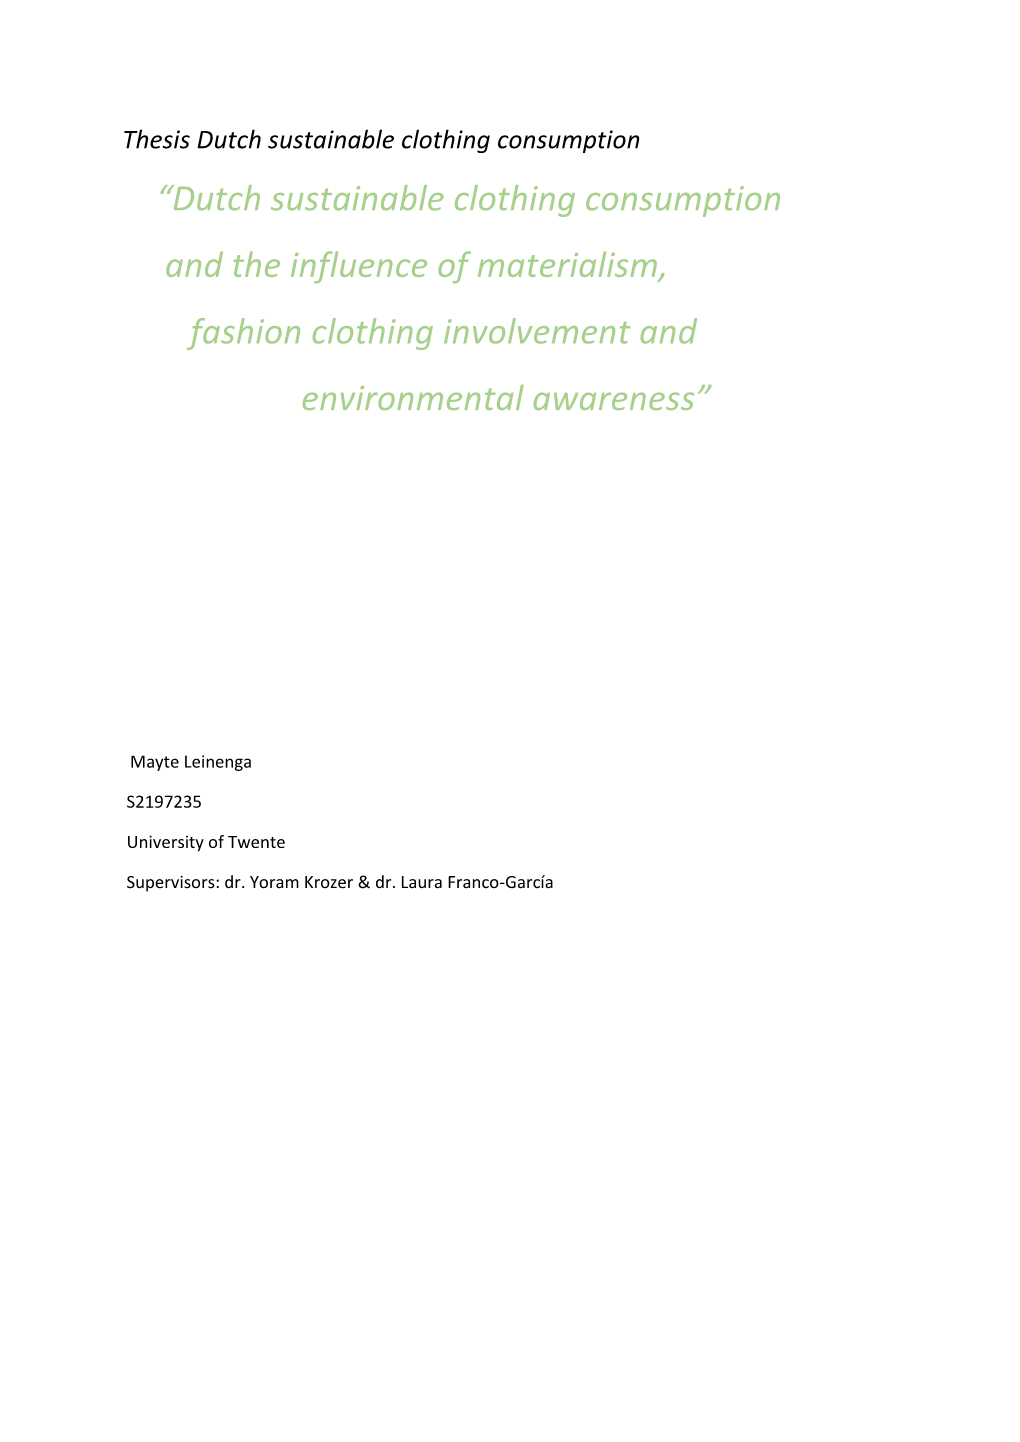 Dutch Sustainable Clothing Consumption and the Influence of Materialism, Fashion Clothing Involvement and Environmental Awareness”